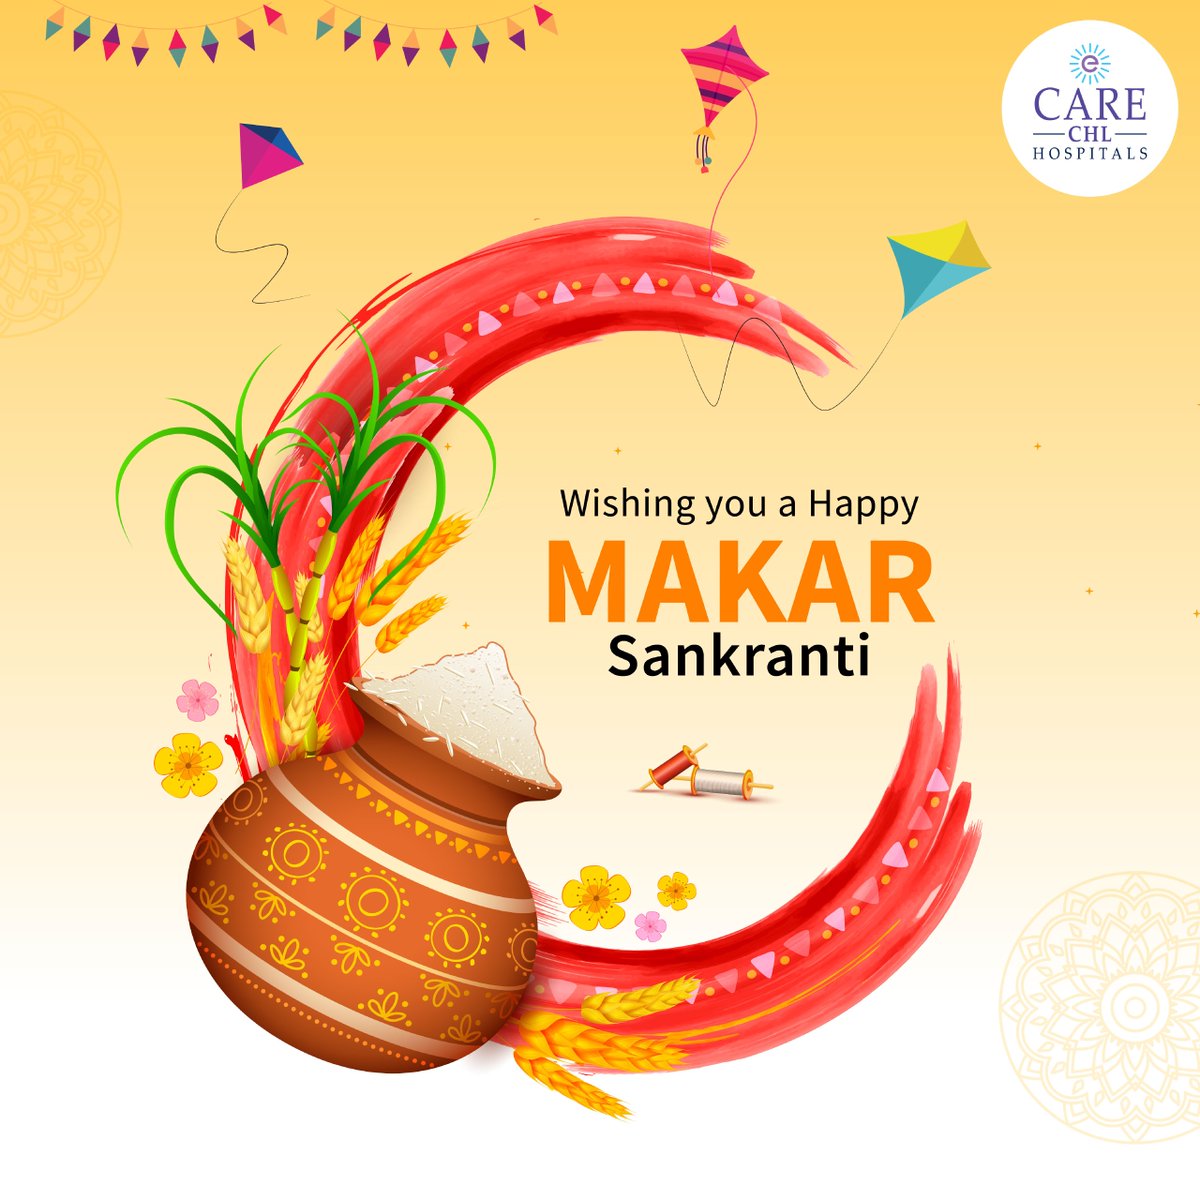 Like the sun in the sky, we hope that you and your families radiate good health and happiness. 

Wishing you and your families a thrilled Makar Sankranti!

#carechlhospitals #carehospitals #makarsankranti2023 #goodhealth